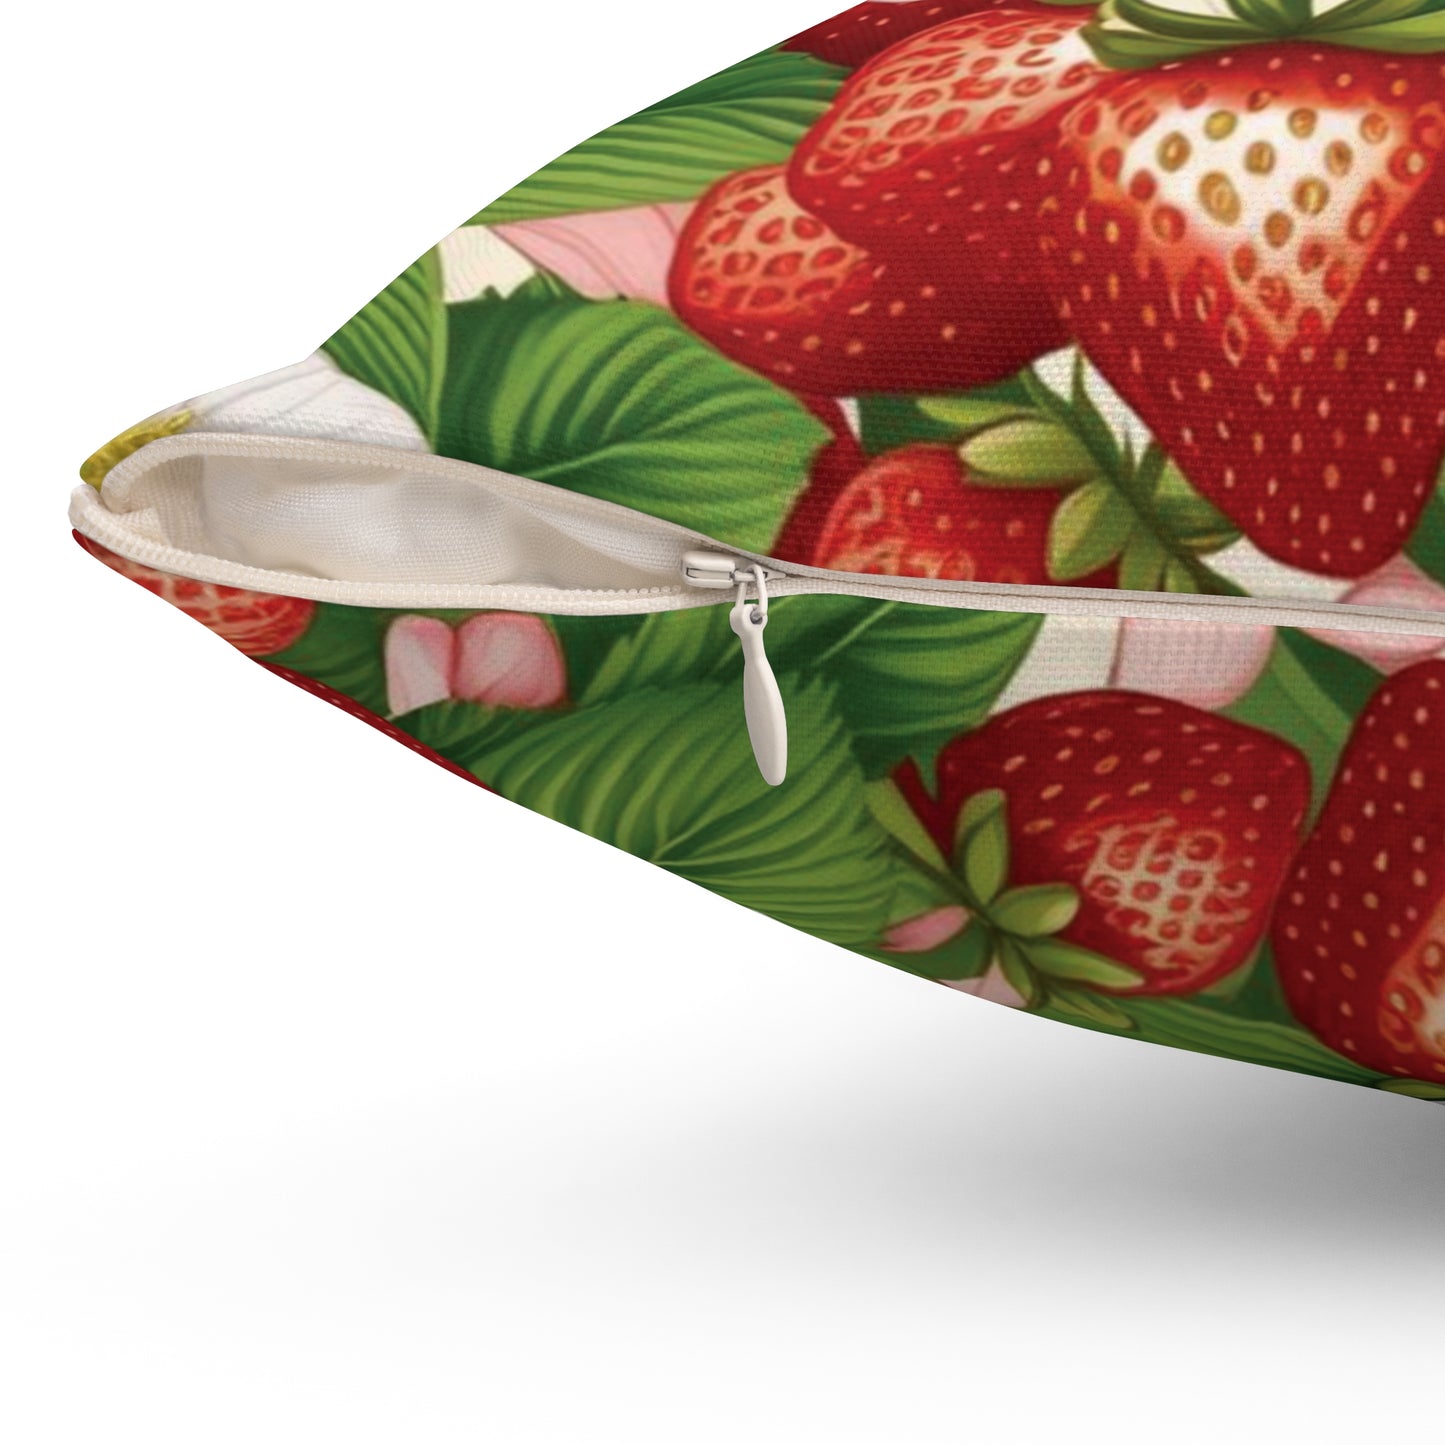 Strawberry Dreams Design on Both Sides of Spun Polyester Square Pillow